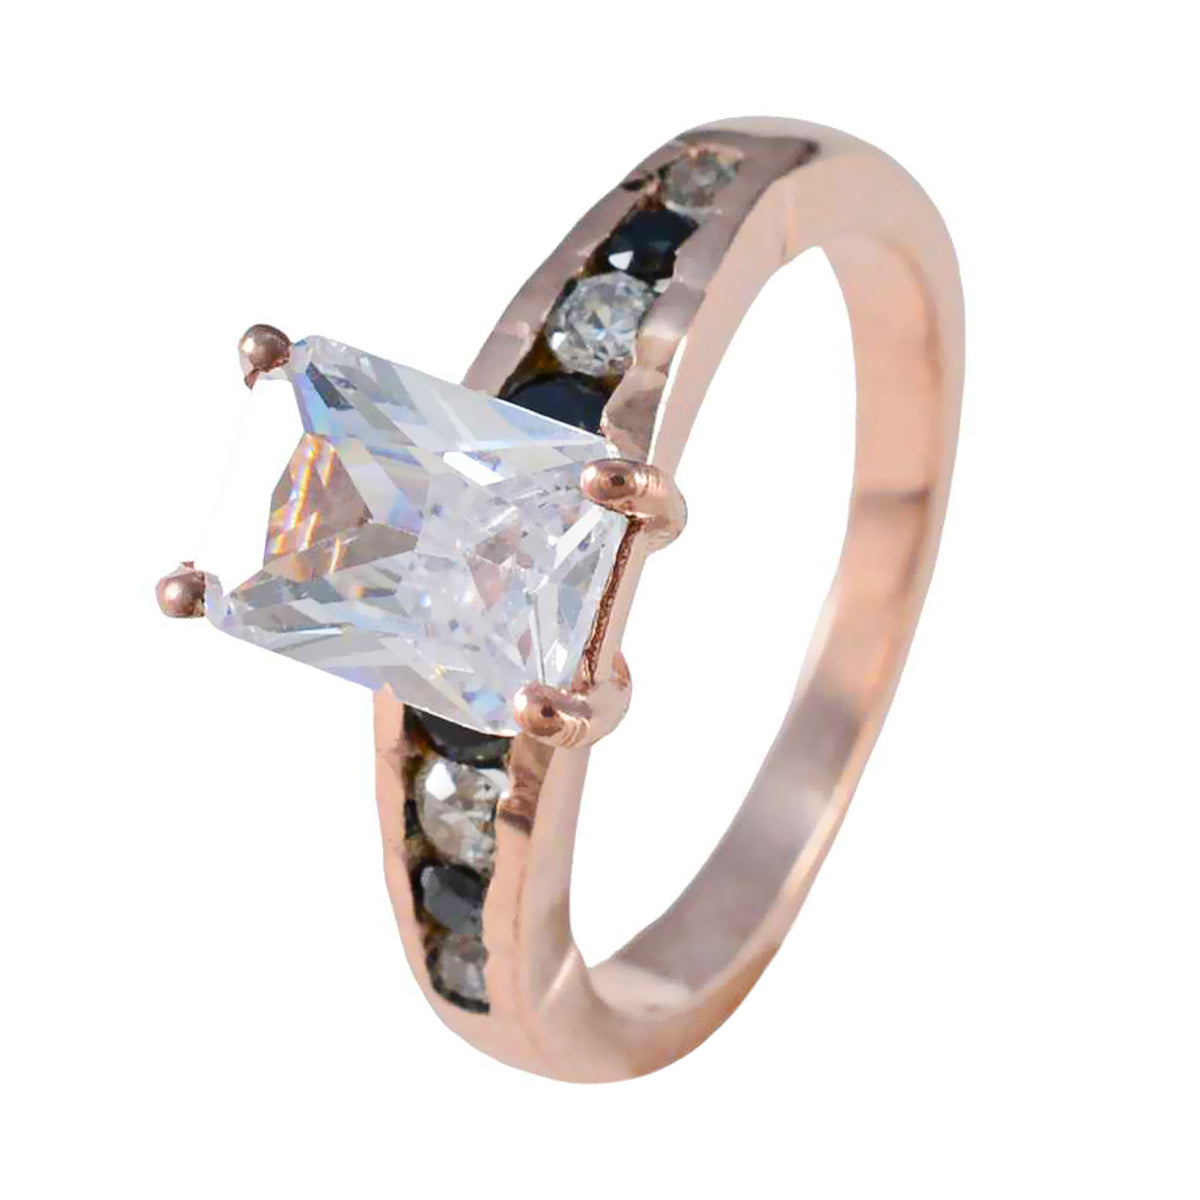 Riyo Adorable Silver Ring With Rose Gold Plating Blue Sapphire Stone Octagon Shape Prong Setting Stylish Jewelry Anniversary Ring